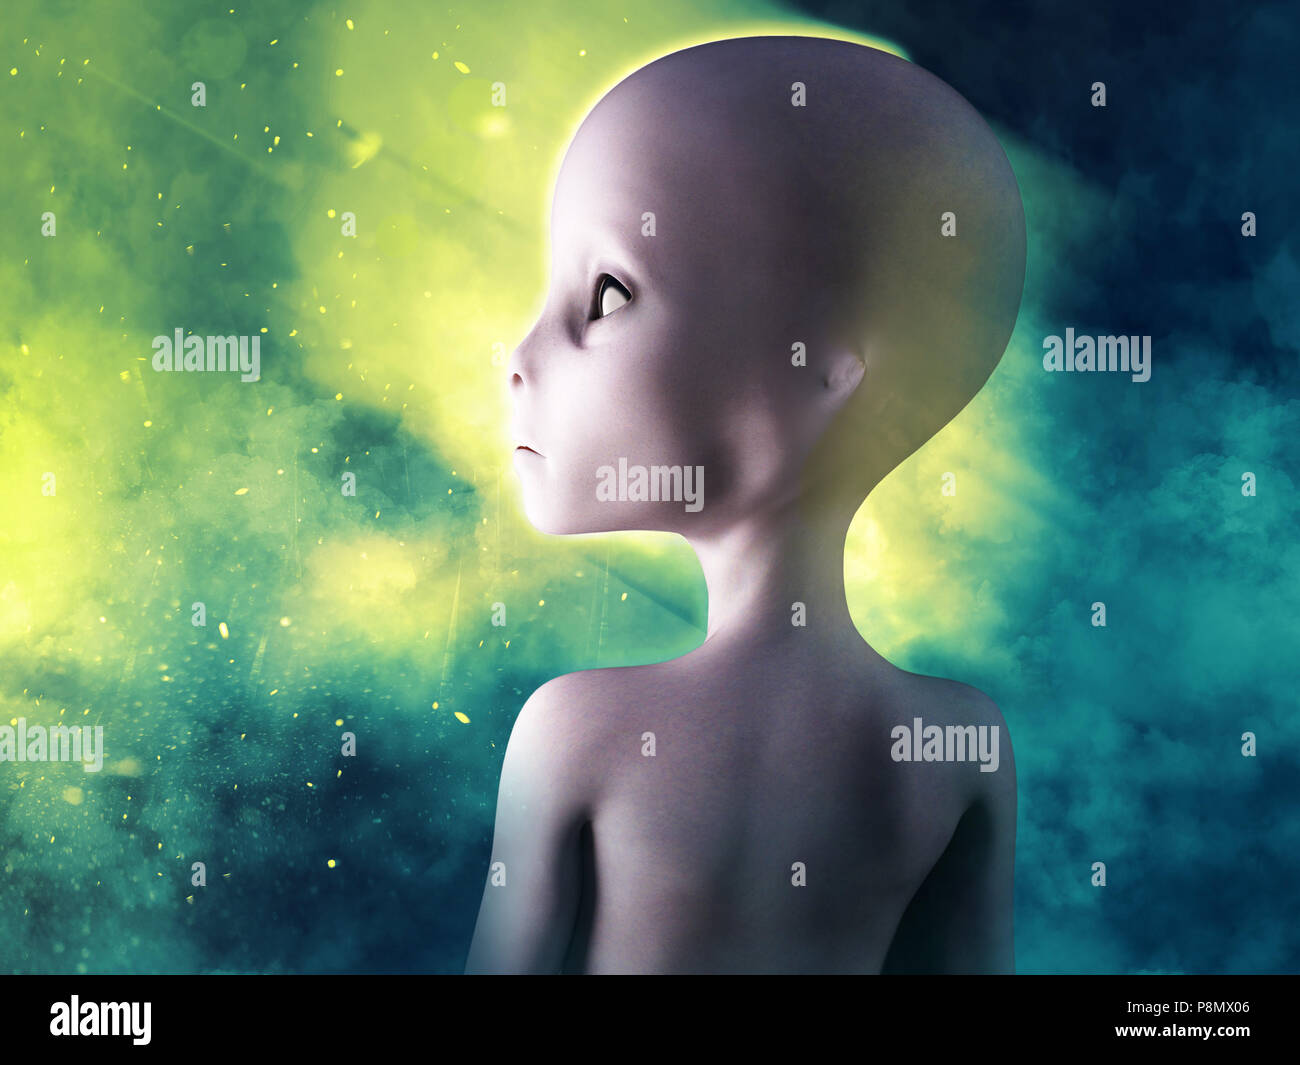 3D rendering of an alien with smoke in the background. Stock Photo